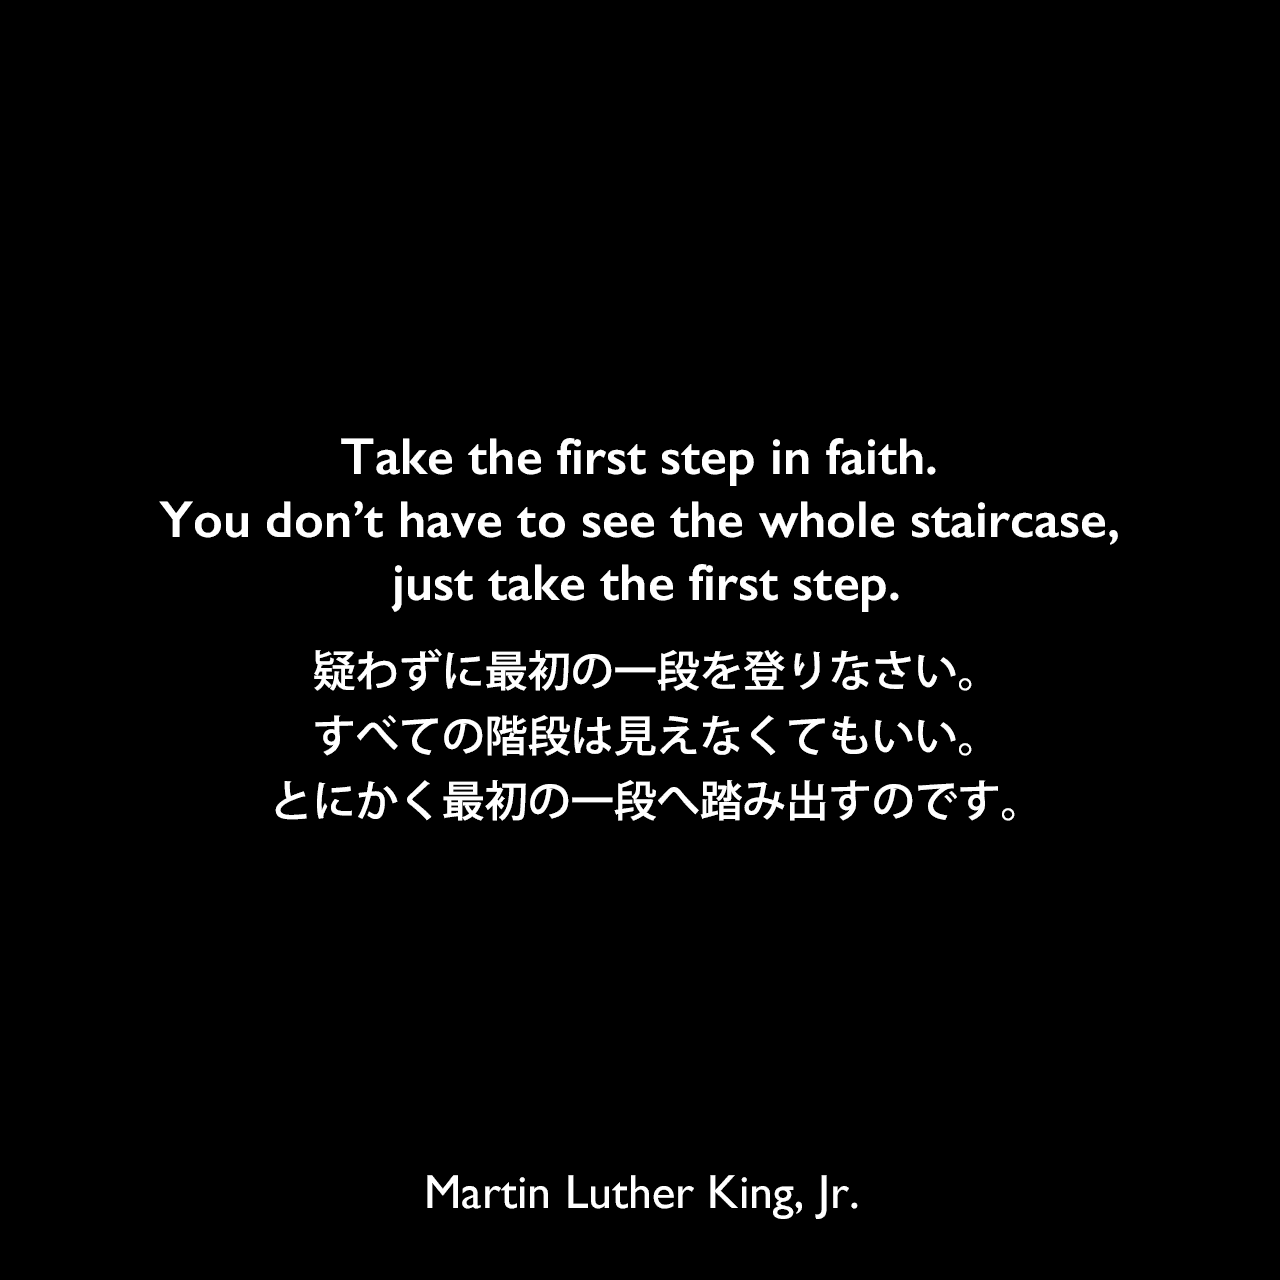 Take the first step in faith. You don’t have to see the whole staircase, just take the first step.疑わずに最初の一段を登りなさい。すべての階段は見えなくてもいい。とにかく最初の一段へ踏み出すのです。Martin Luther King, Jr.